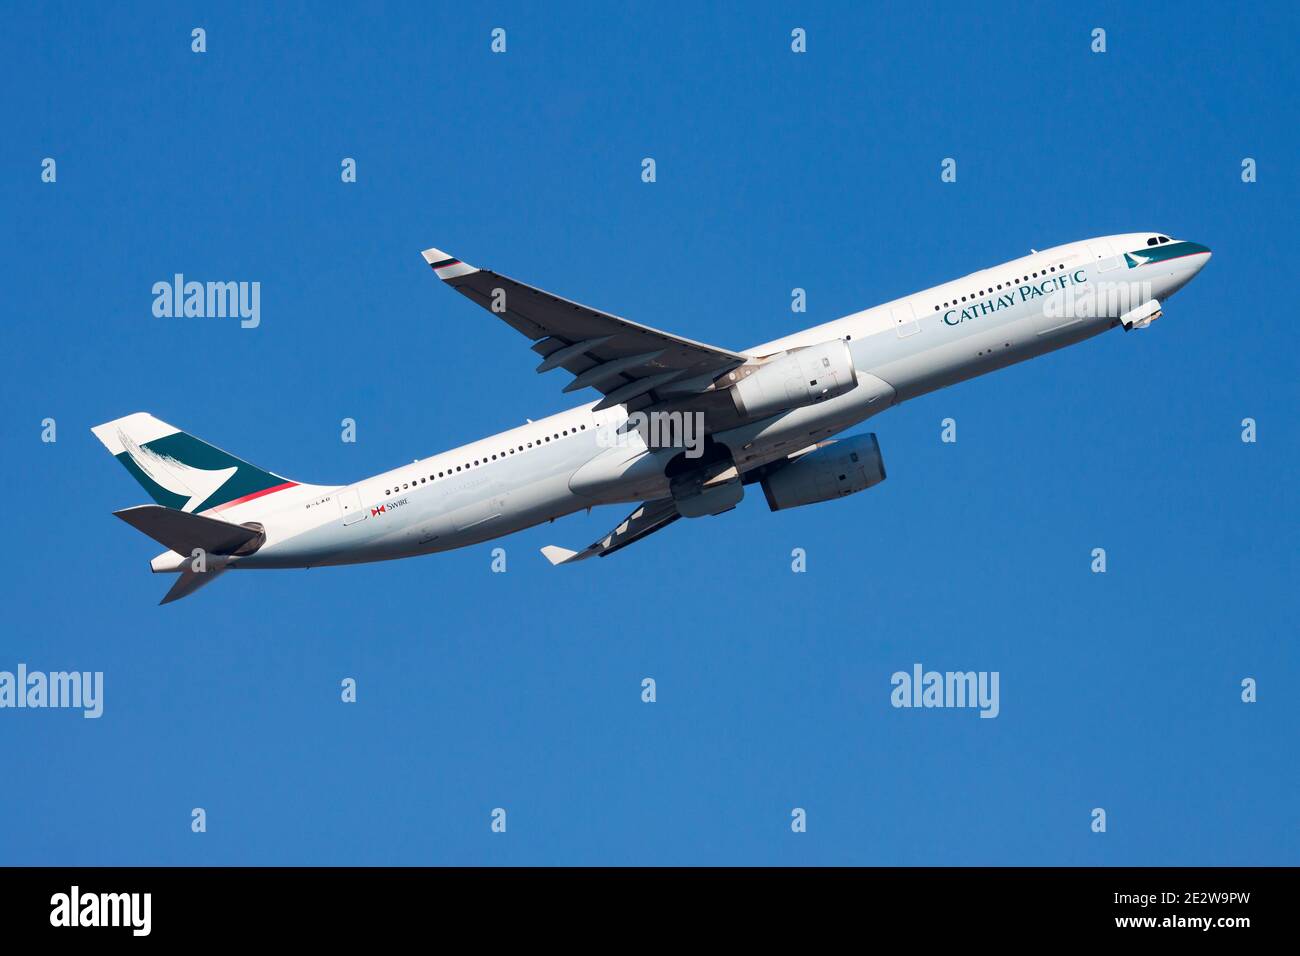 Cathay Pacific Airways Airbus A330-300 B-LAD passenger plane departure and  take off at Hong Kong Chek Lap Kok Airport Stock Photo - Alamy